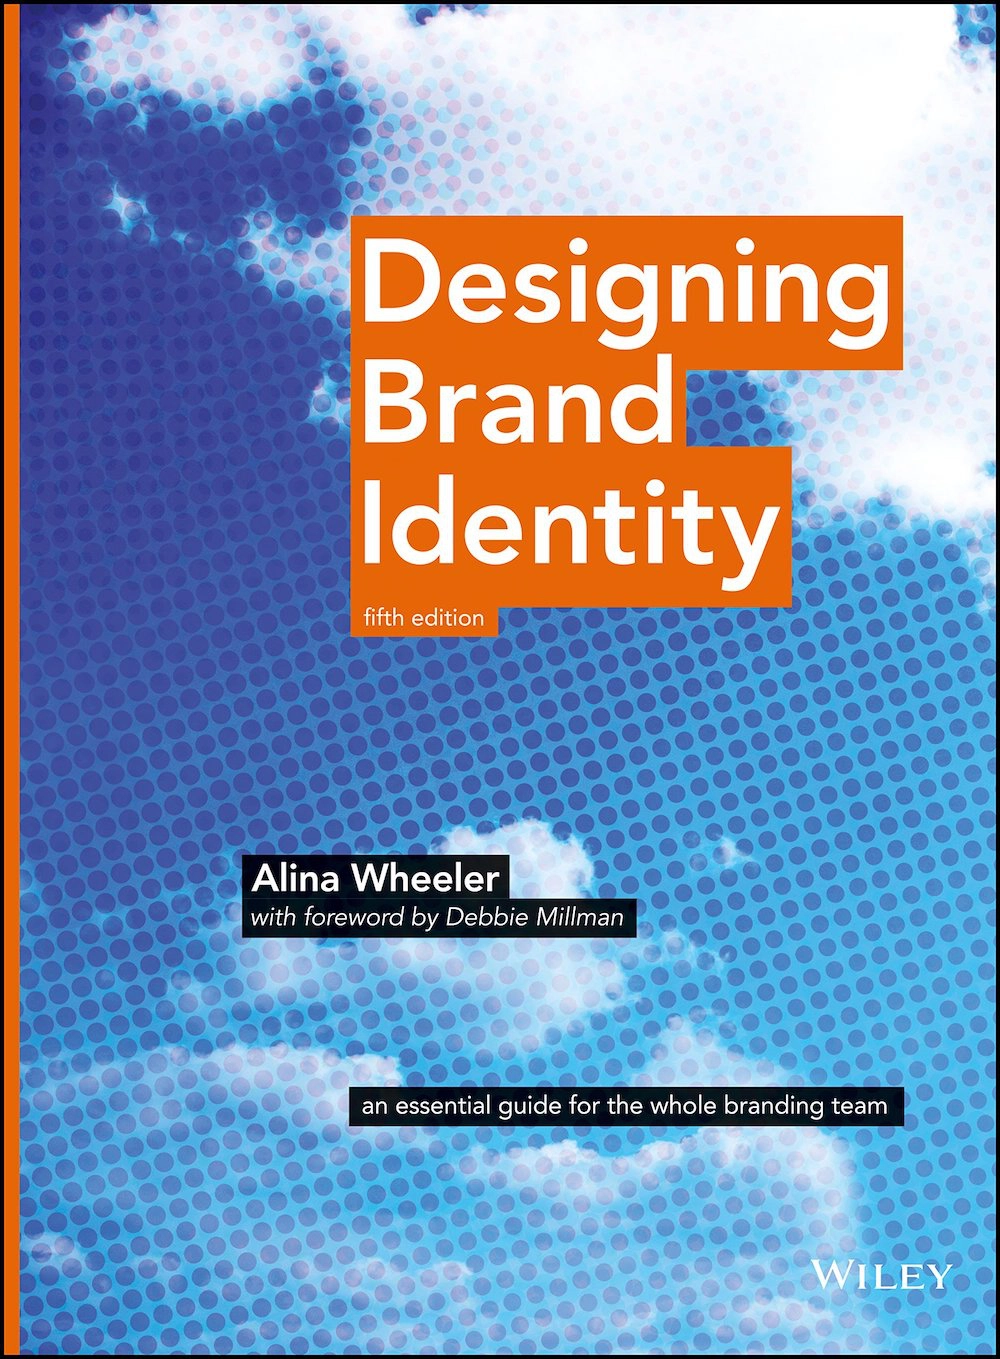 Designing Brand Identity: An Essential Guide for the Whole Branding Team by Alina Wheeler 